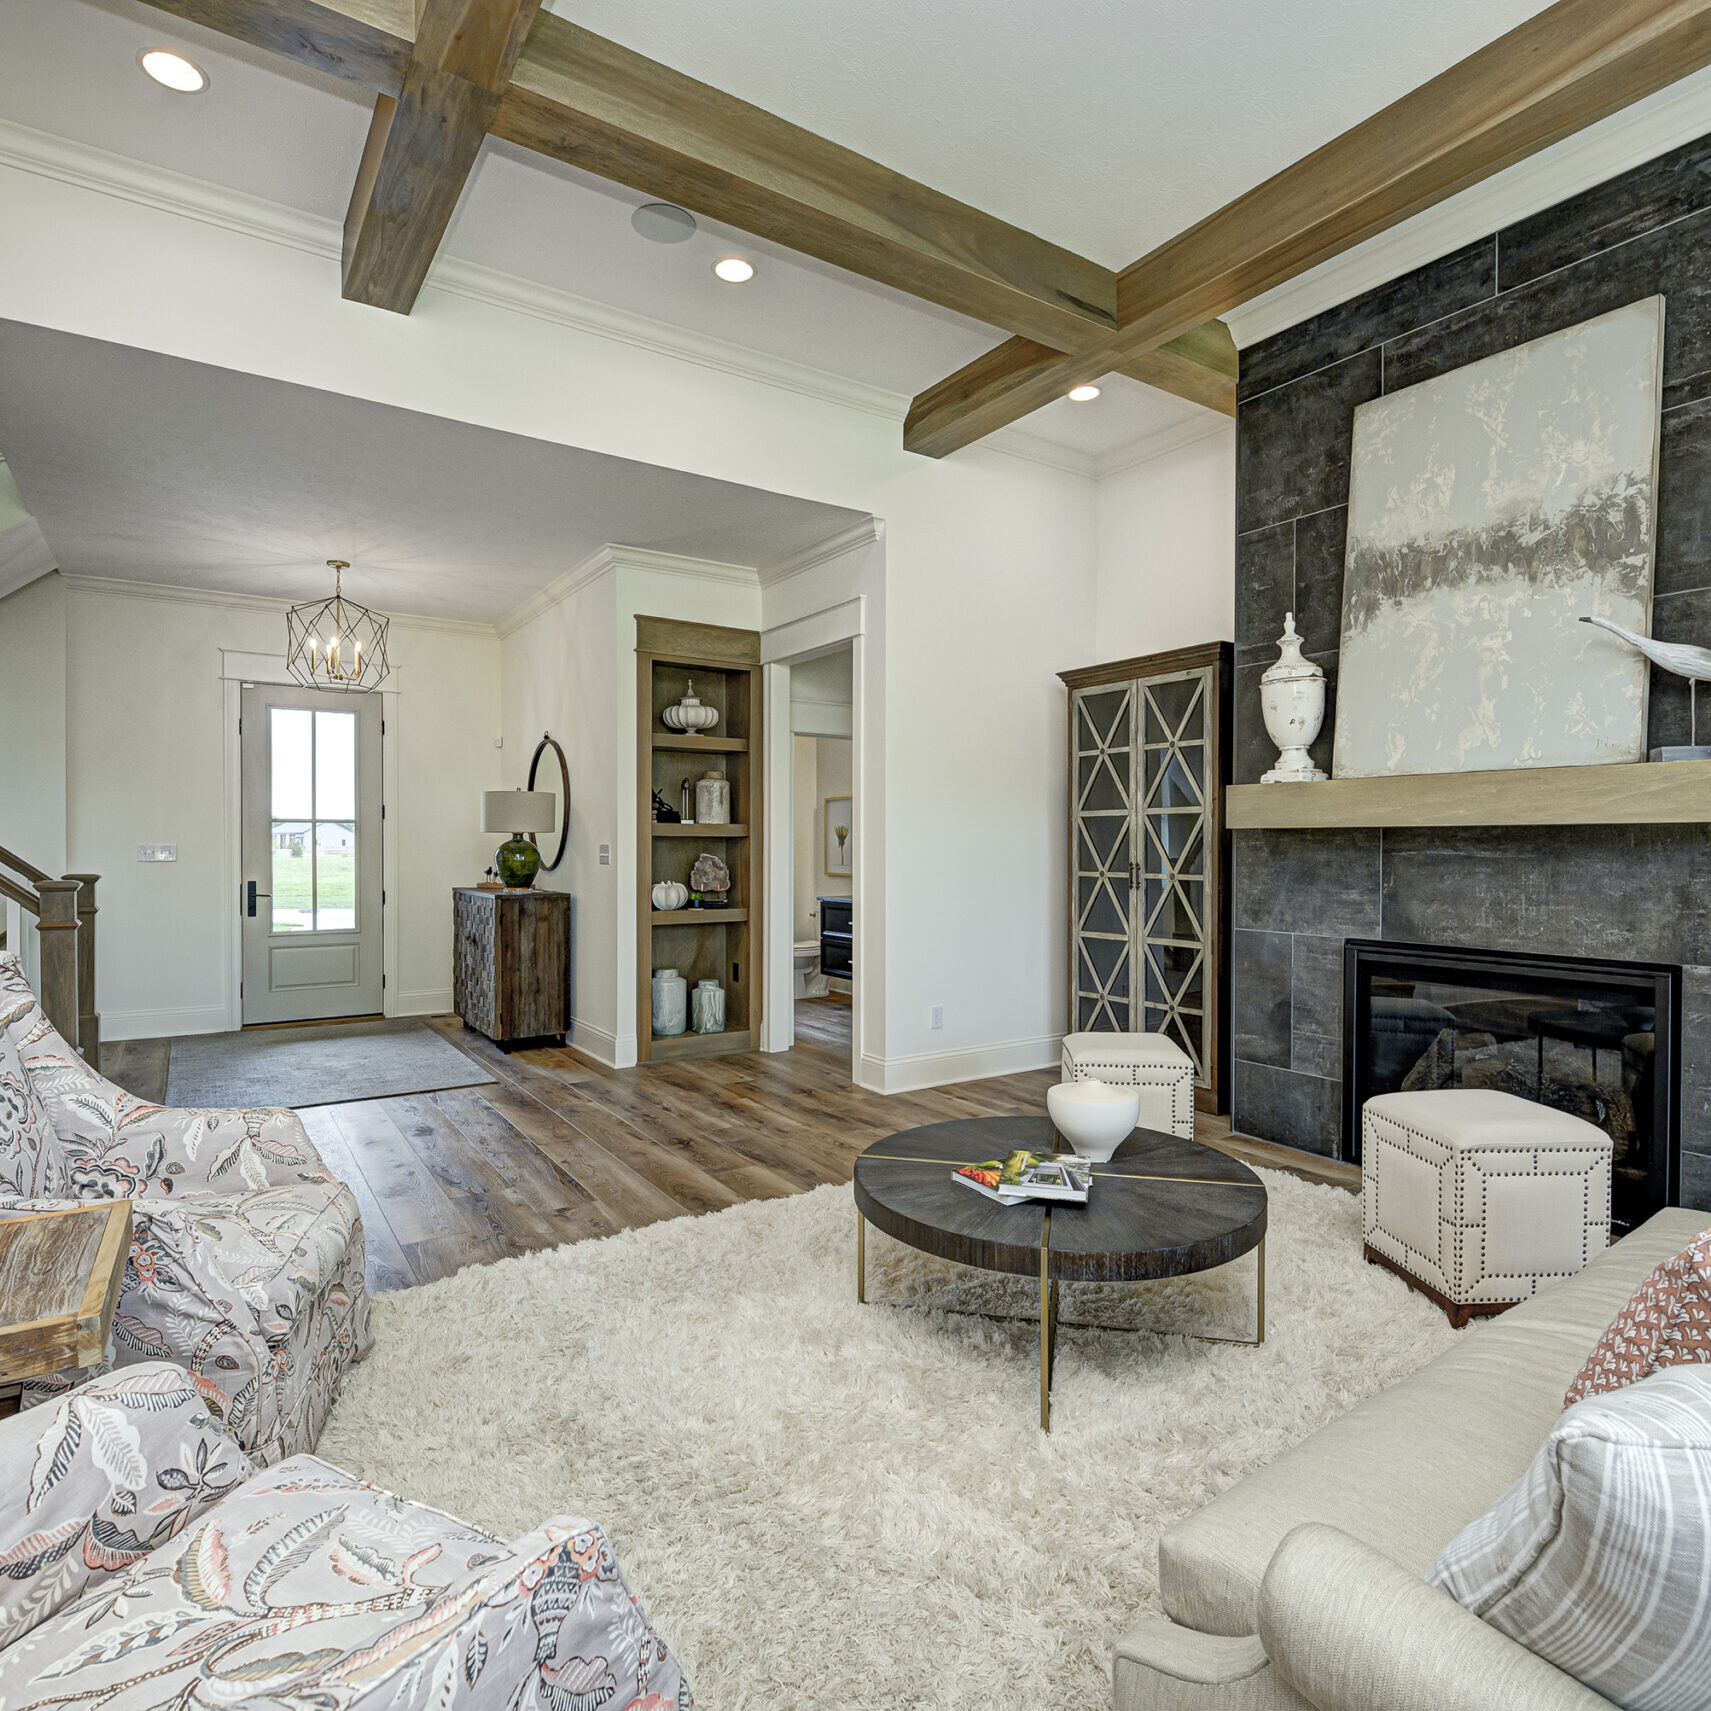 A cozy living room with wood beams and a fireplace, designed by an expert custom home builder in Fishers, Indiana.